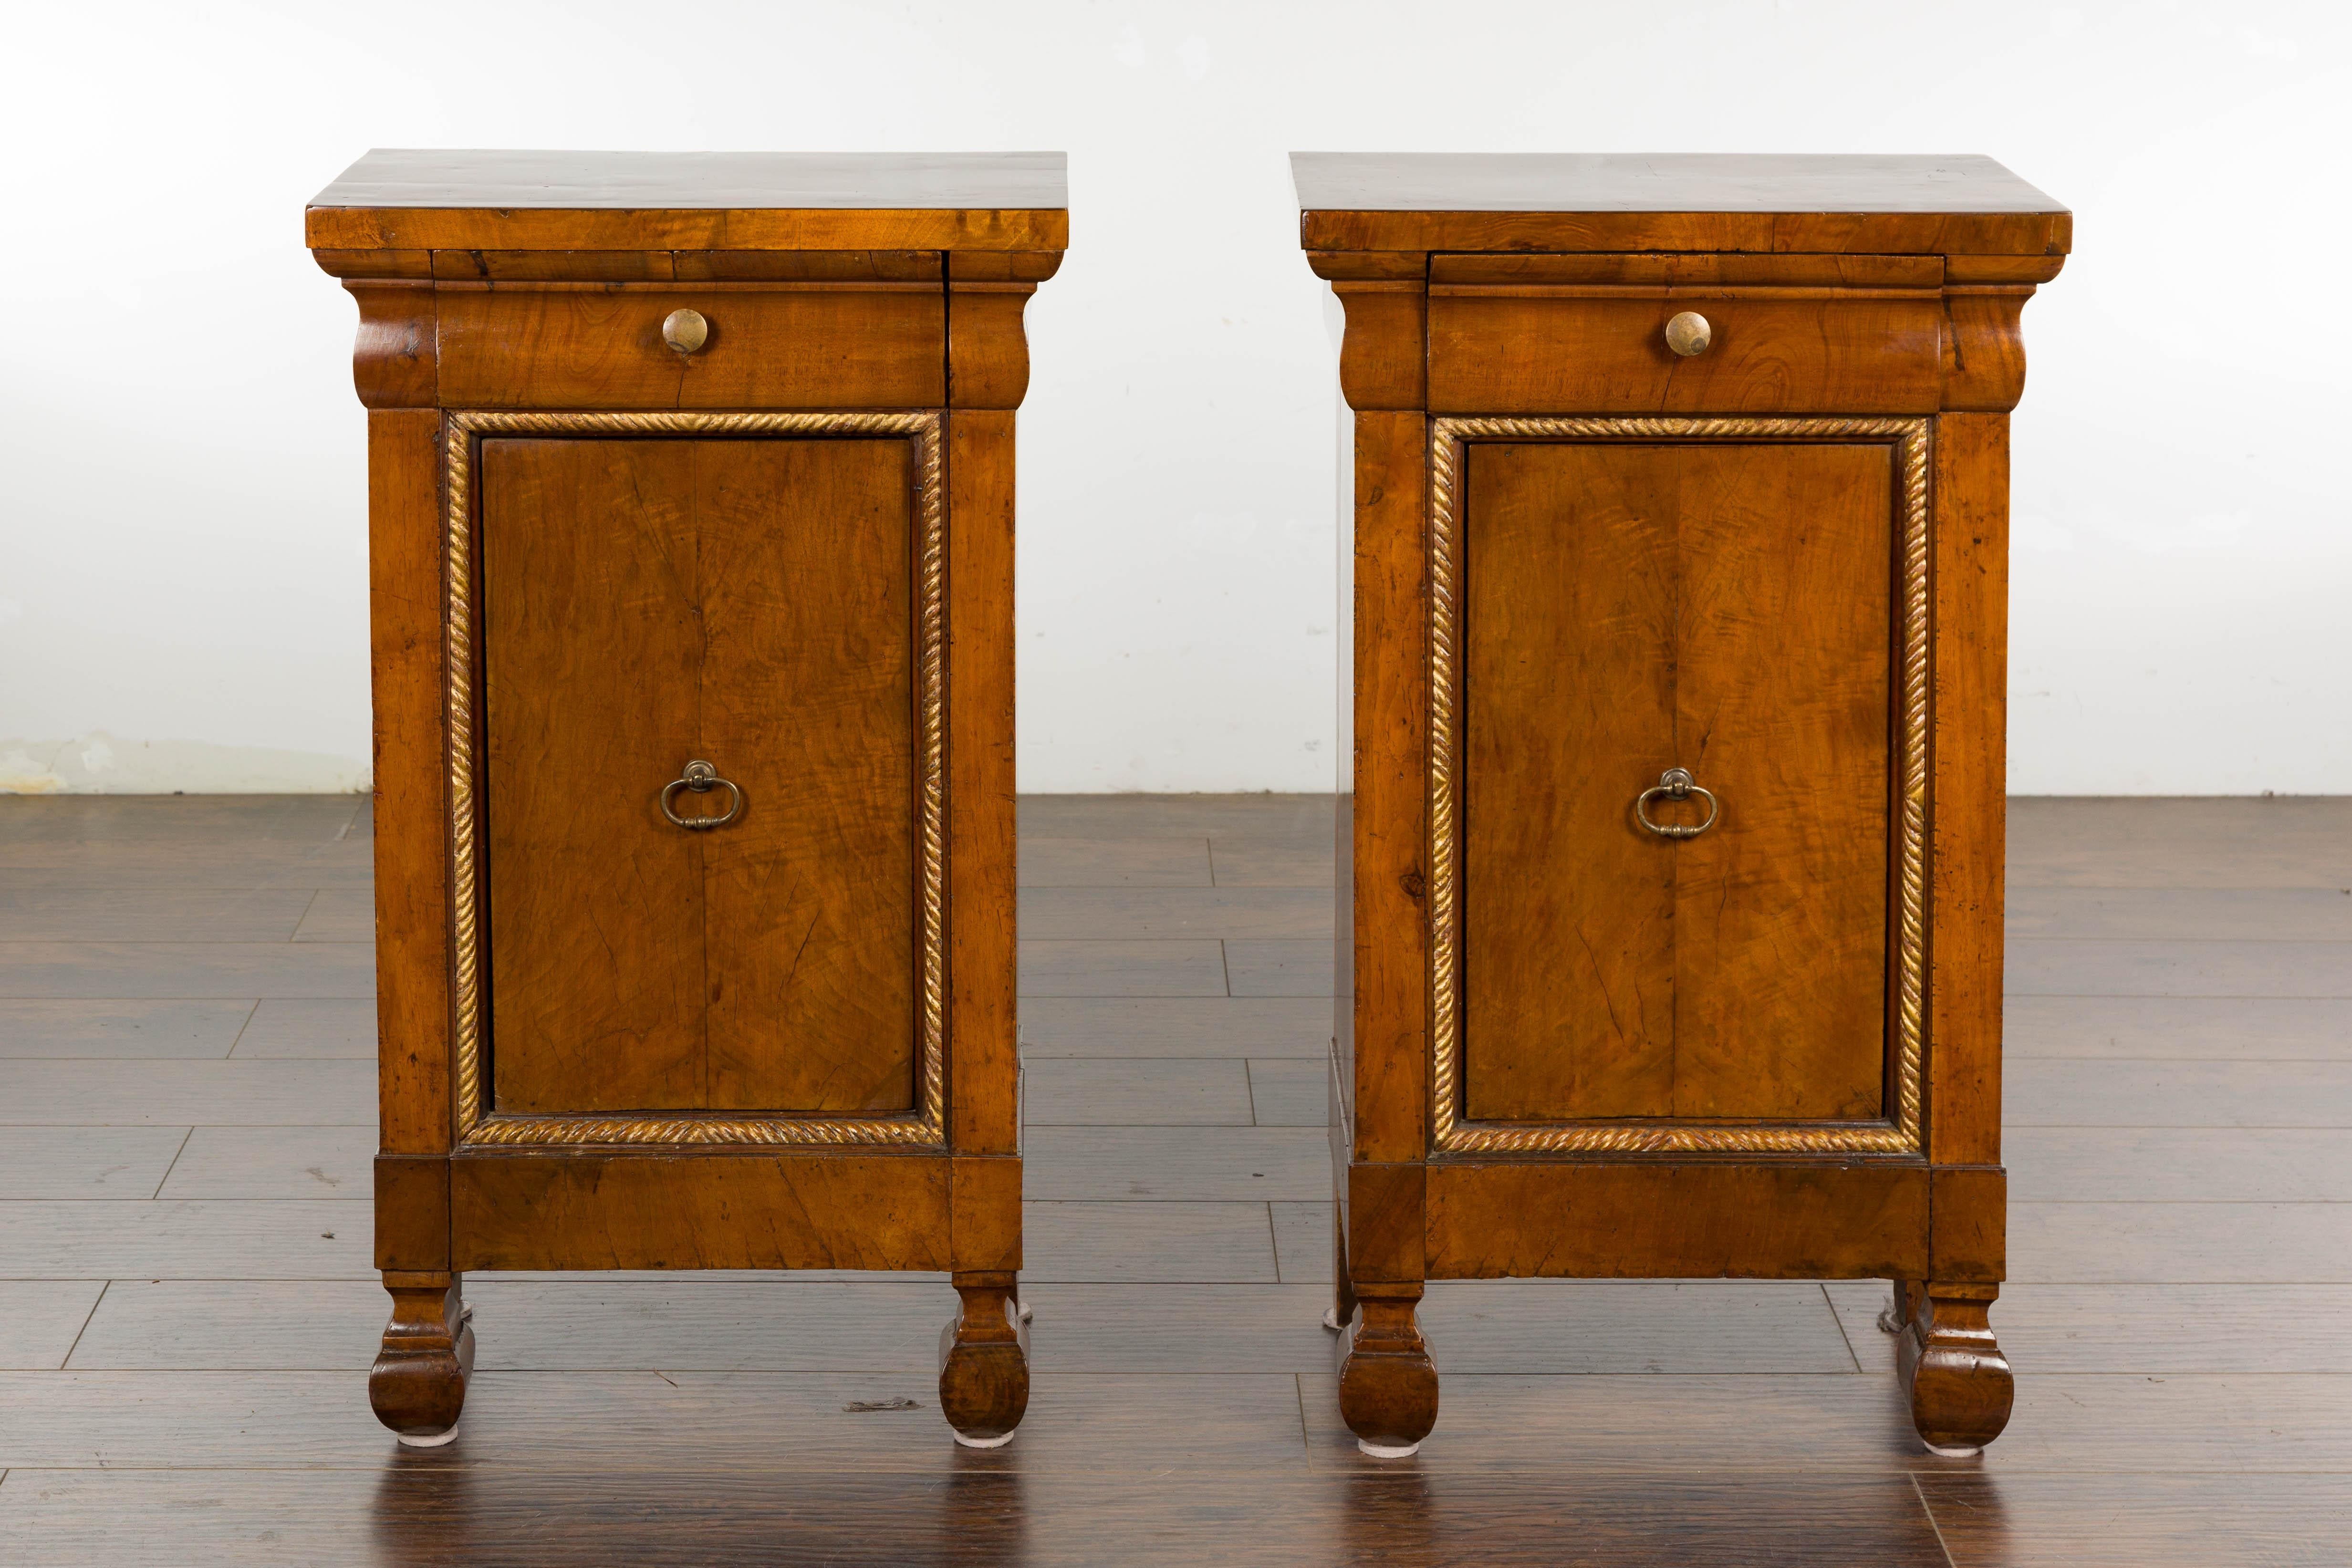 A pair of Italian walnut bedside cabinets from circa 1800 with single drawer and single door, carved giltwood twisted rope motif and carved feet. Discover an air of timeless elegance with this pair of 19th-century Italian walnut bedside cabinets, a